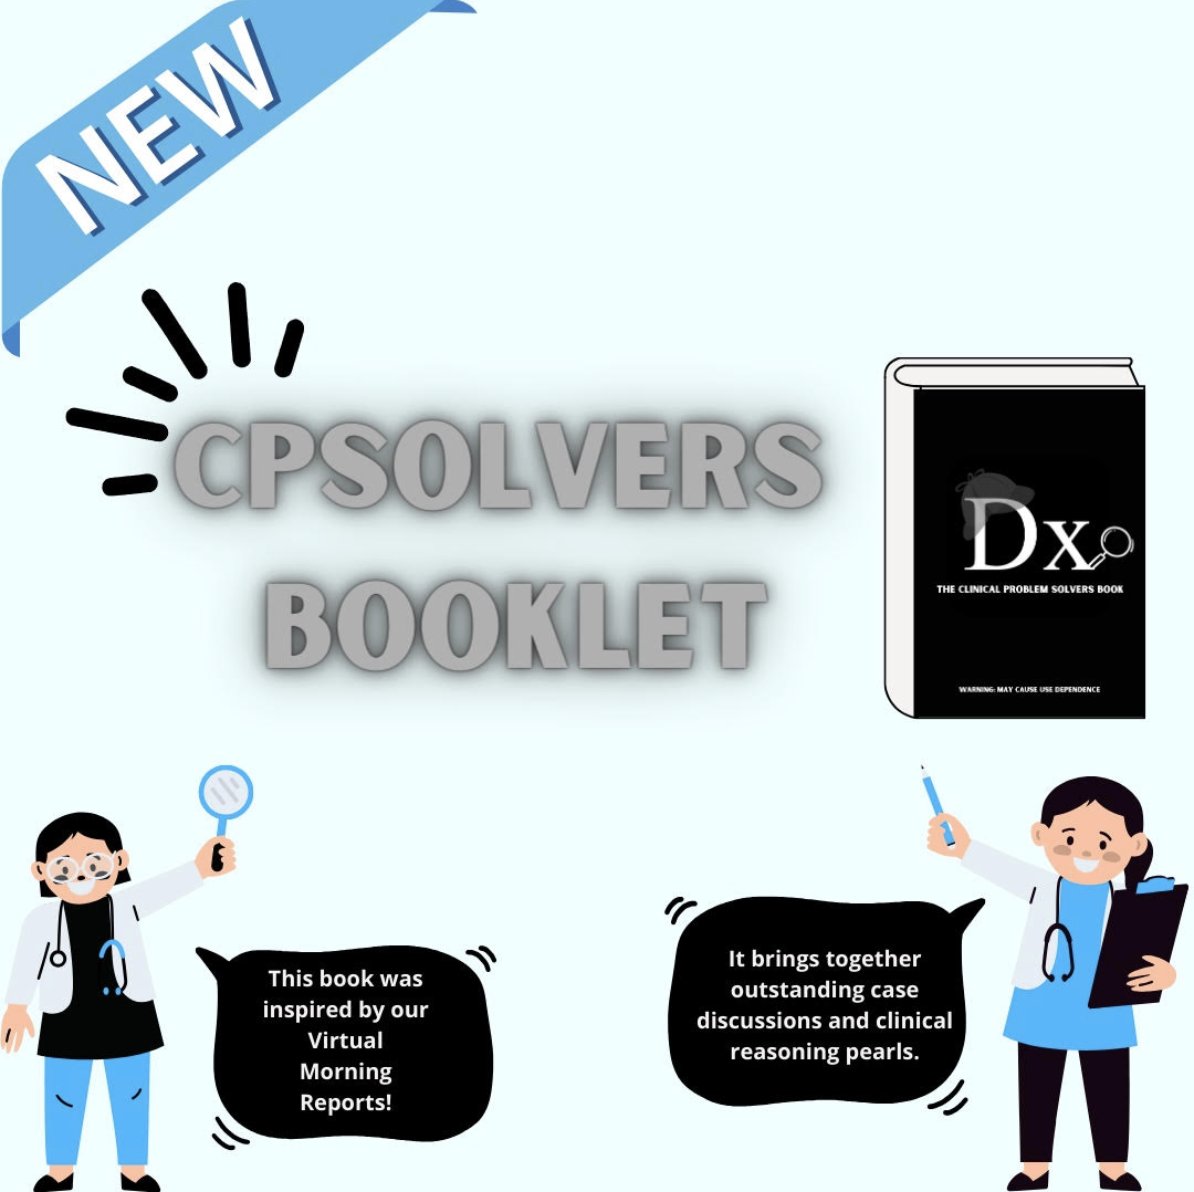 We are excited to announce our new CPSolvers Booklet! The CPSolvers Booklet contains a compilation of case themes based on previous VMRs presented this year. We hope this serves as a valuable resource to YOU! Check out this new and free resource here bit.ly/47LcrXc